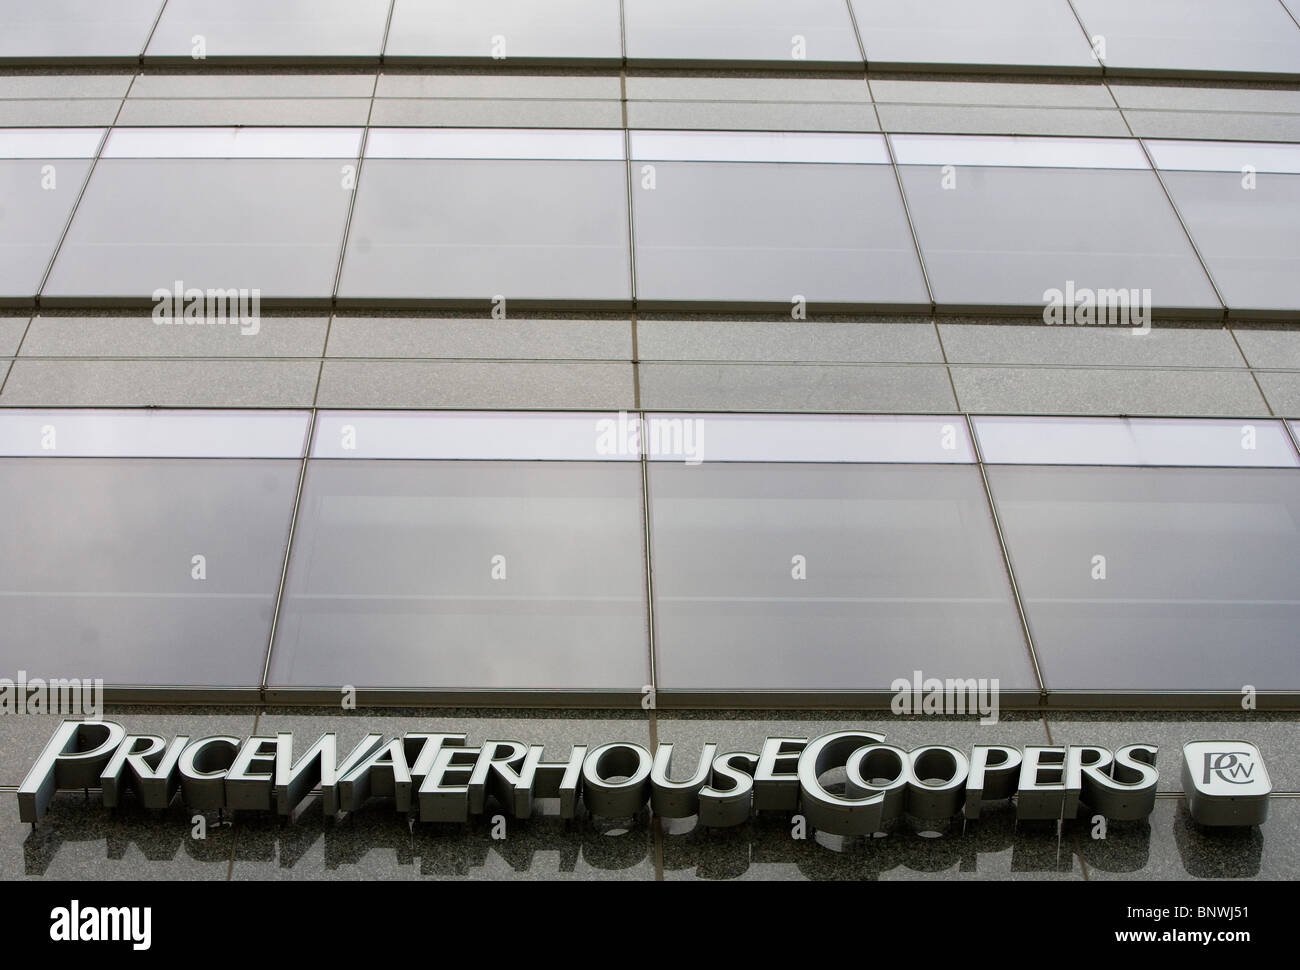 Price Waterhouse Coopers. Banque D'Images